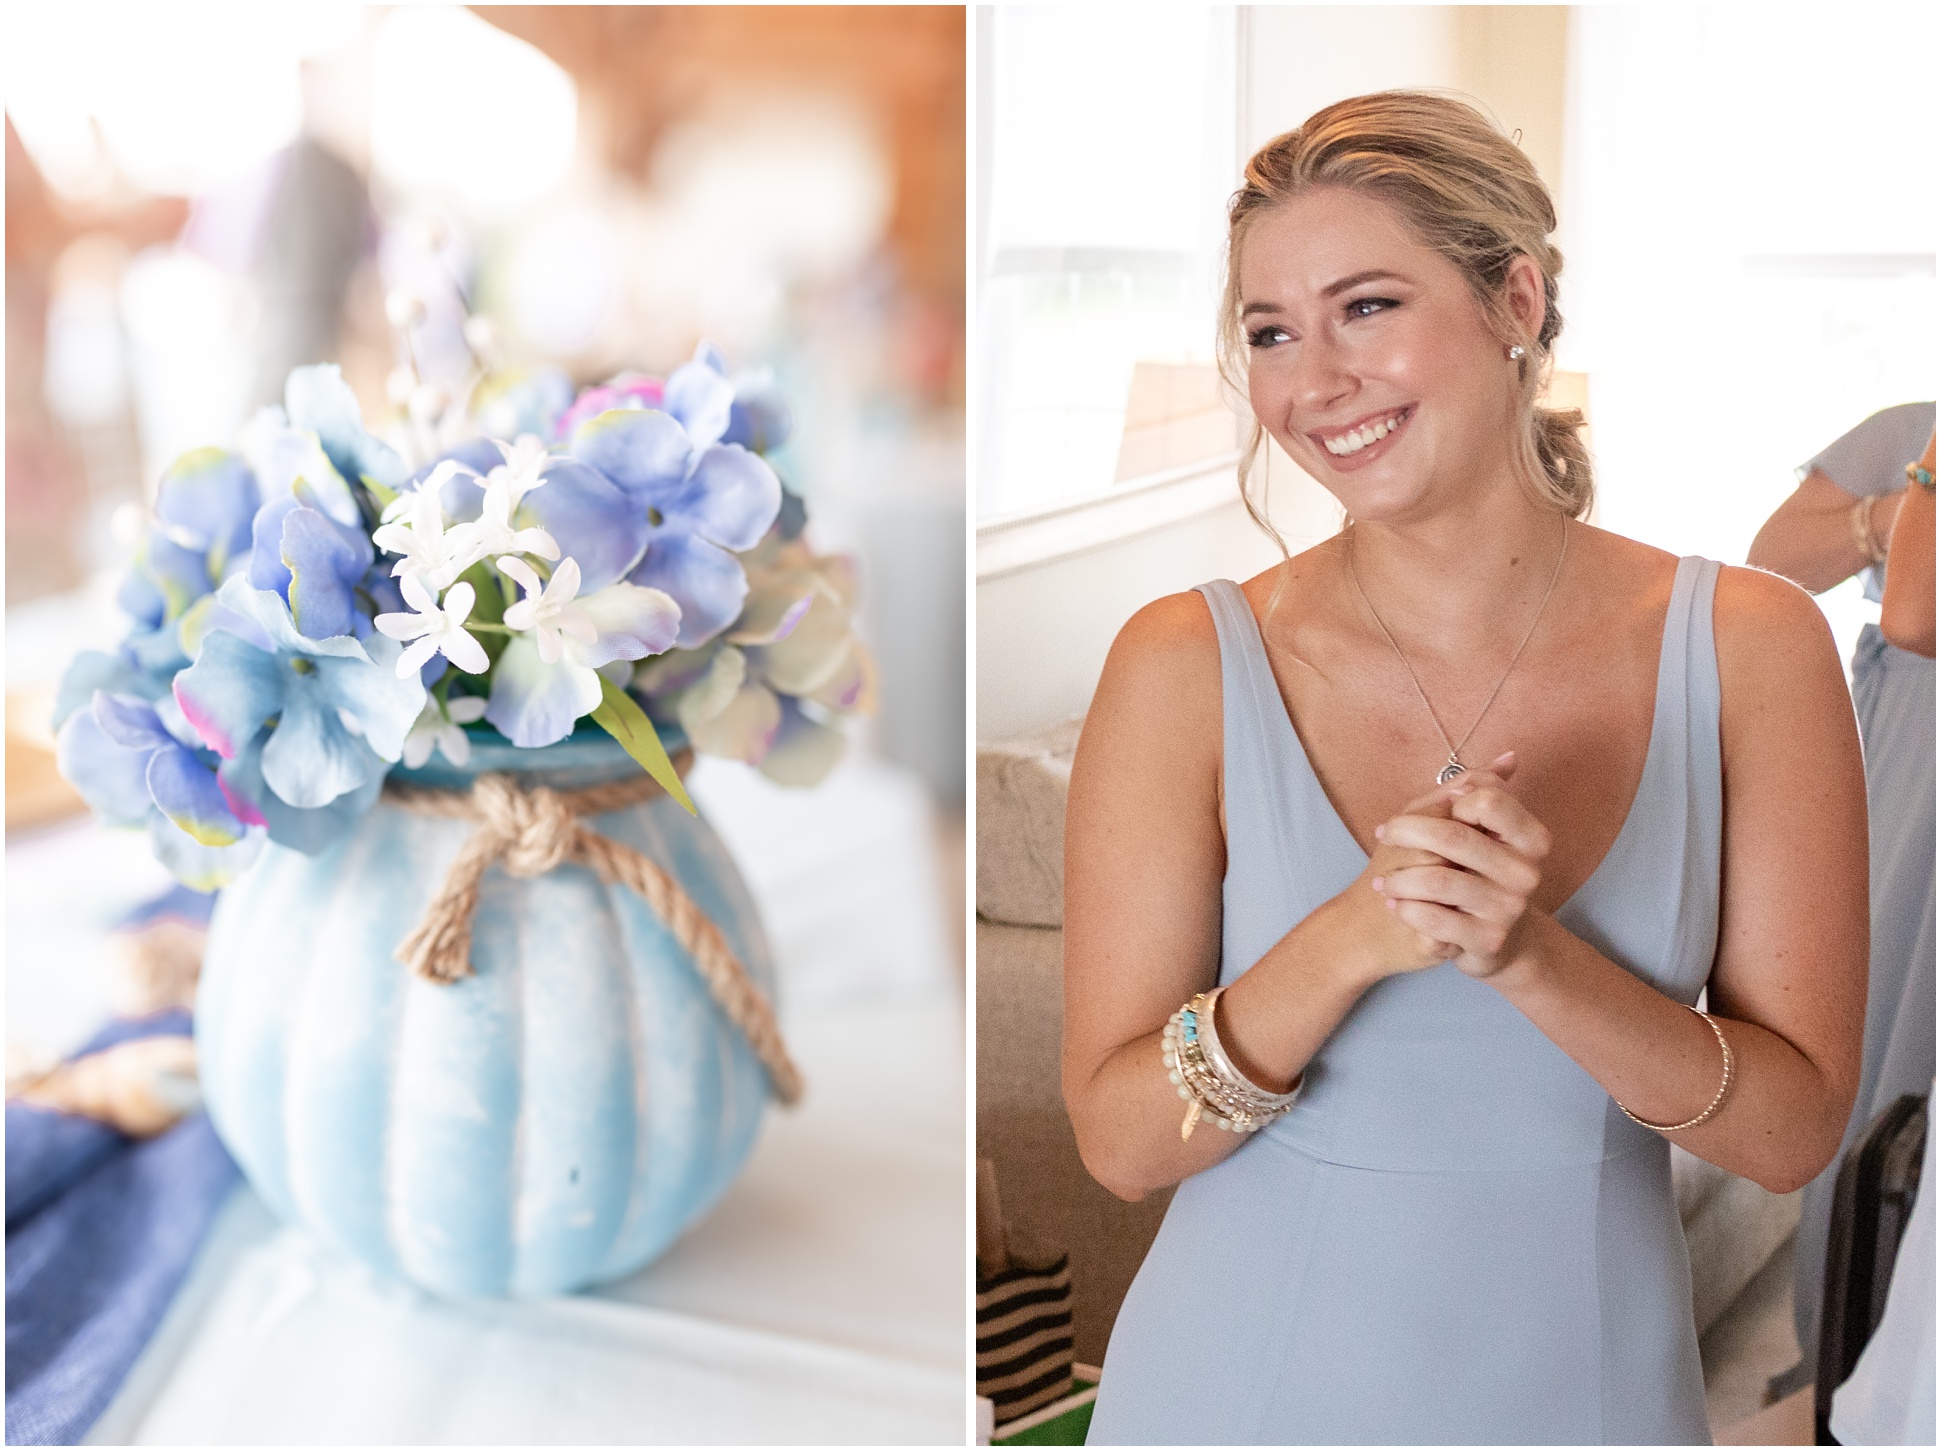 Left Image: reception table detail, Right Image: Maid of honor smiling at Bride and her dad seeing each other